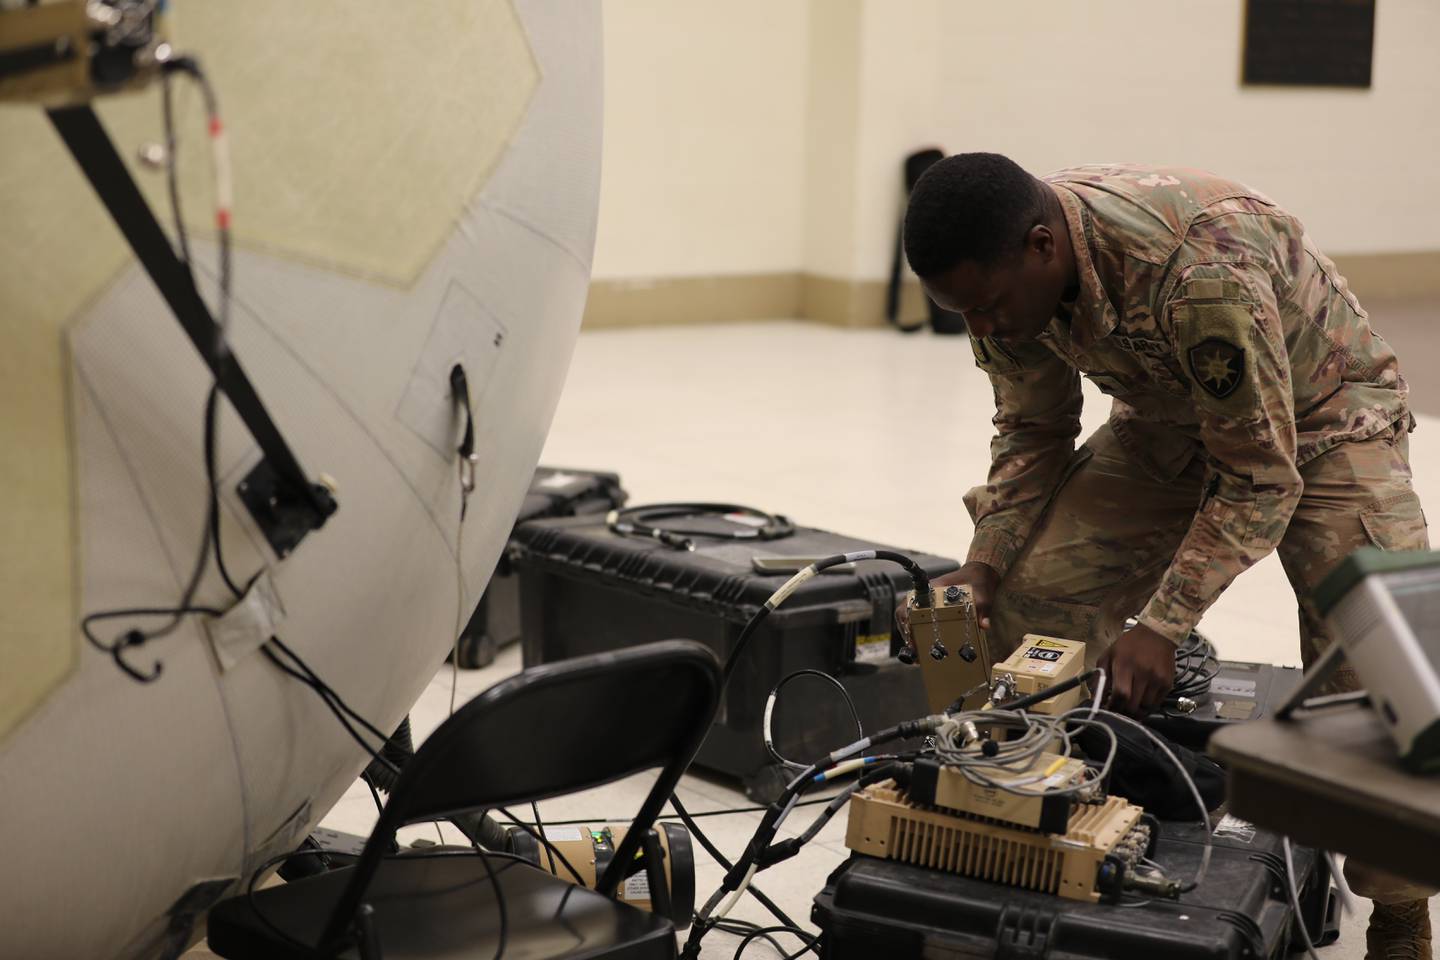 Sgt. Kasey Jones, a soldier from the Florida National Guard’s 146th Expeditionary Signal Battalion, assesses equipment vital to communication in the fight against Hurricane Ian.